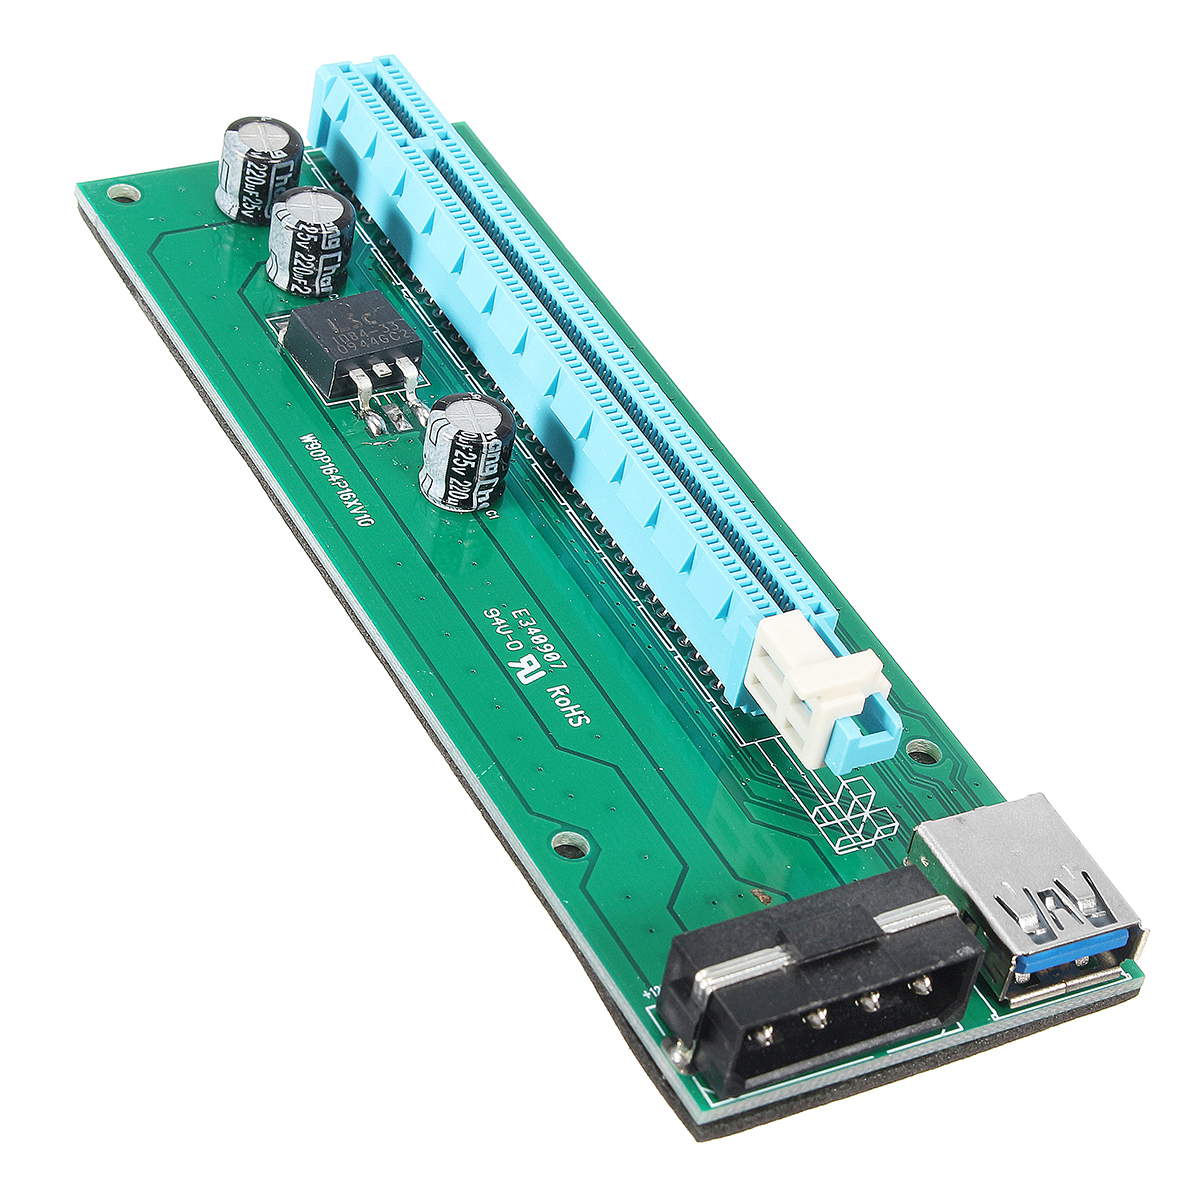 PCI-E-1X-to-16X-Mining-Machine-Enhanced-Extender-Riser-Adapter-With-Power-Cable-1972752-6